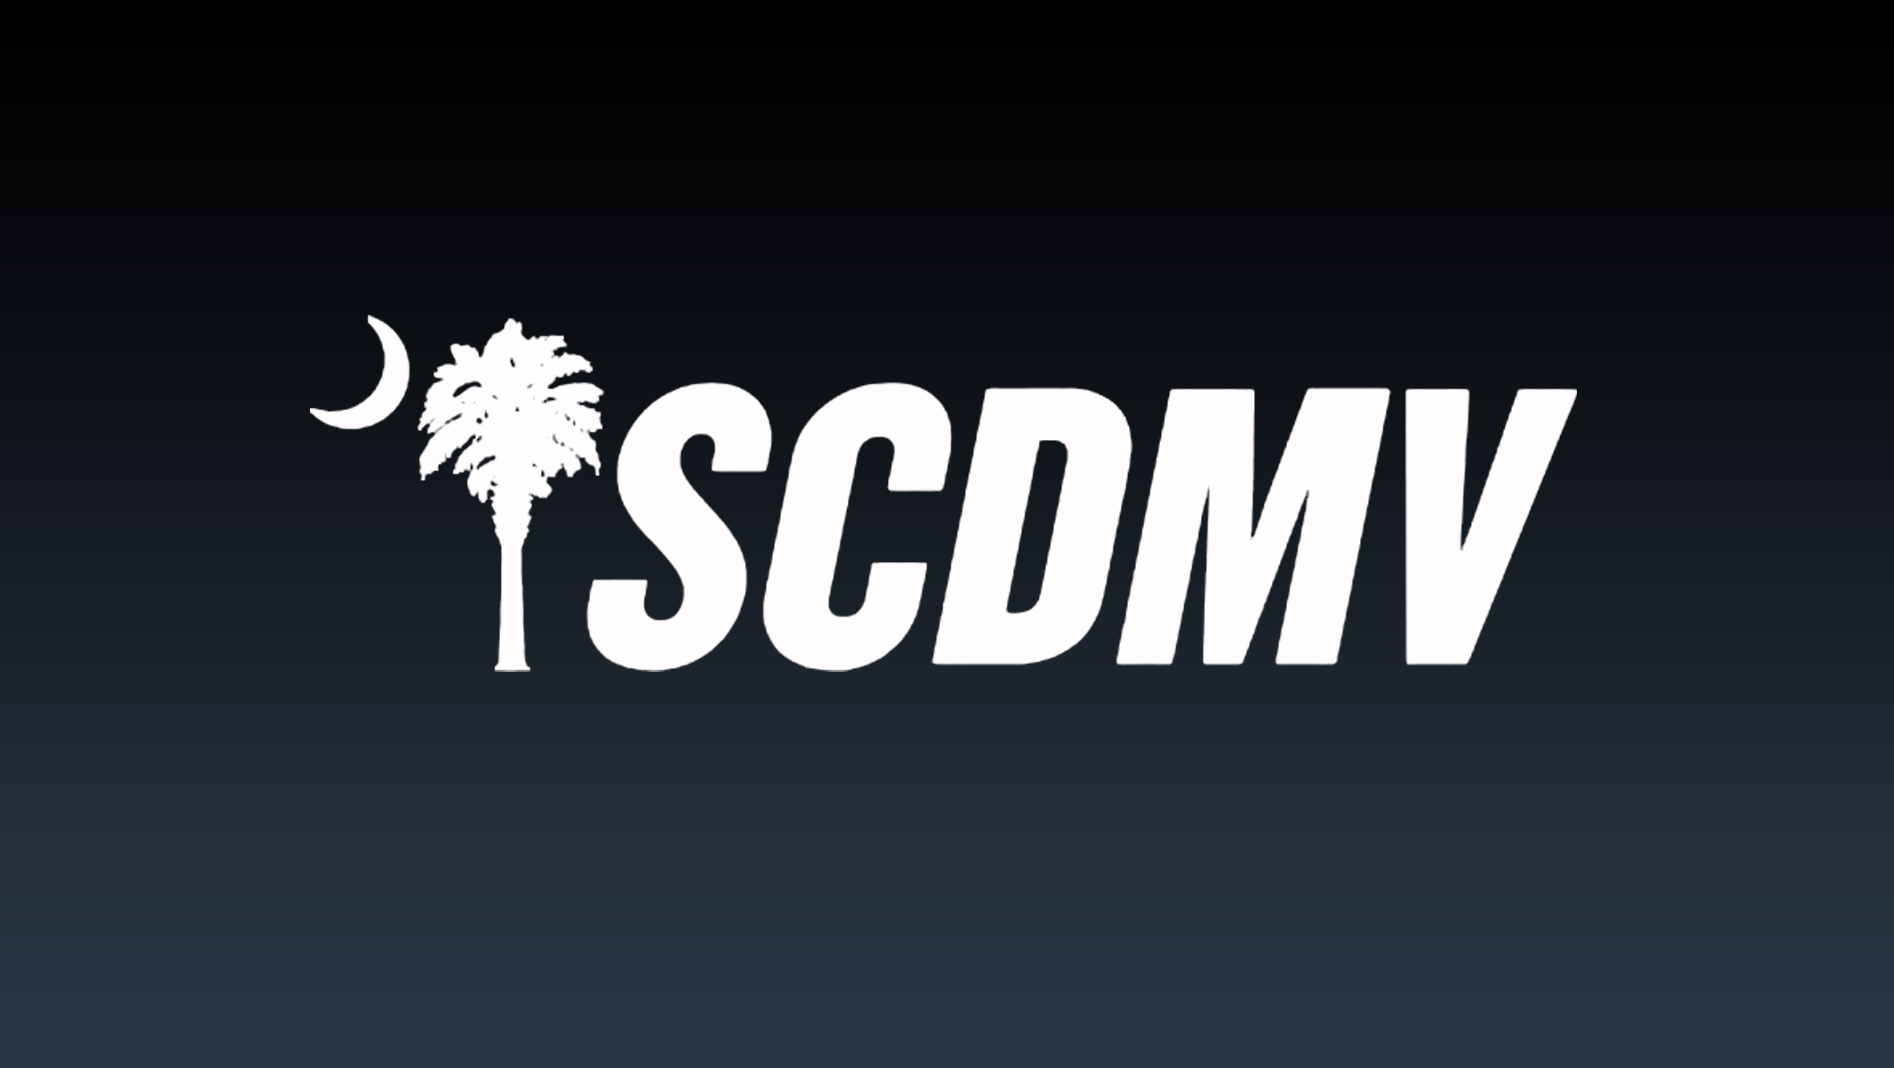 South Carolina: DMV reports technical difficultie at branches